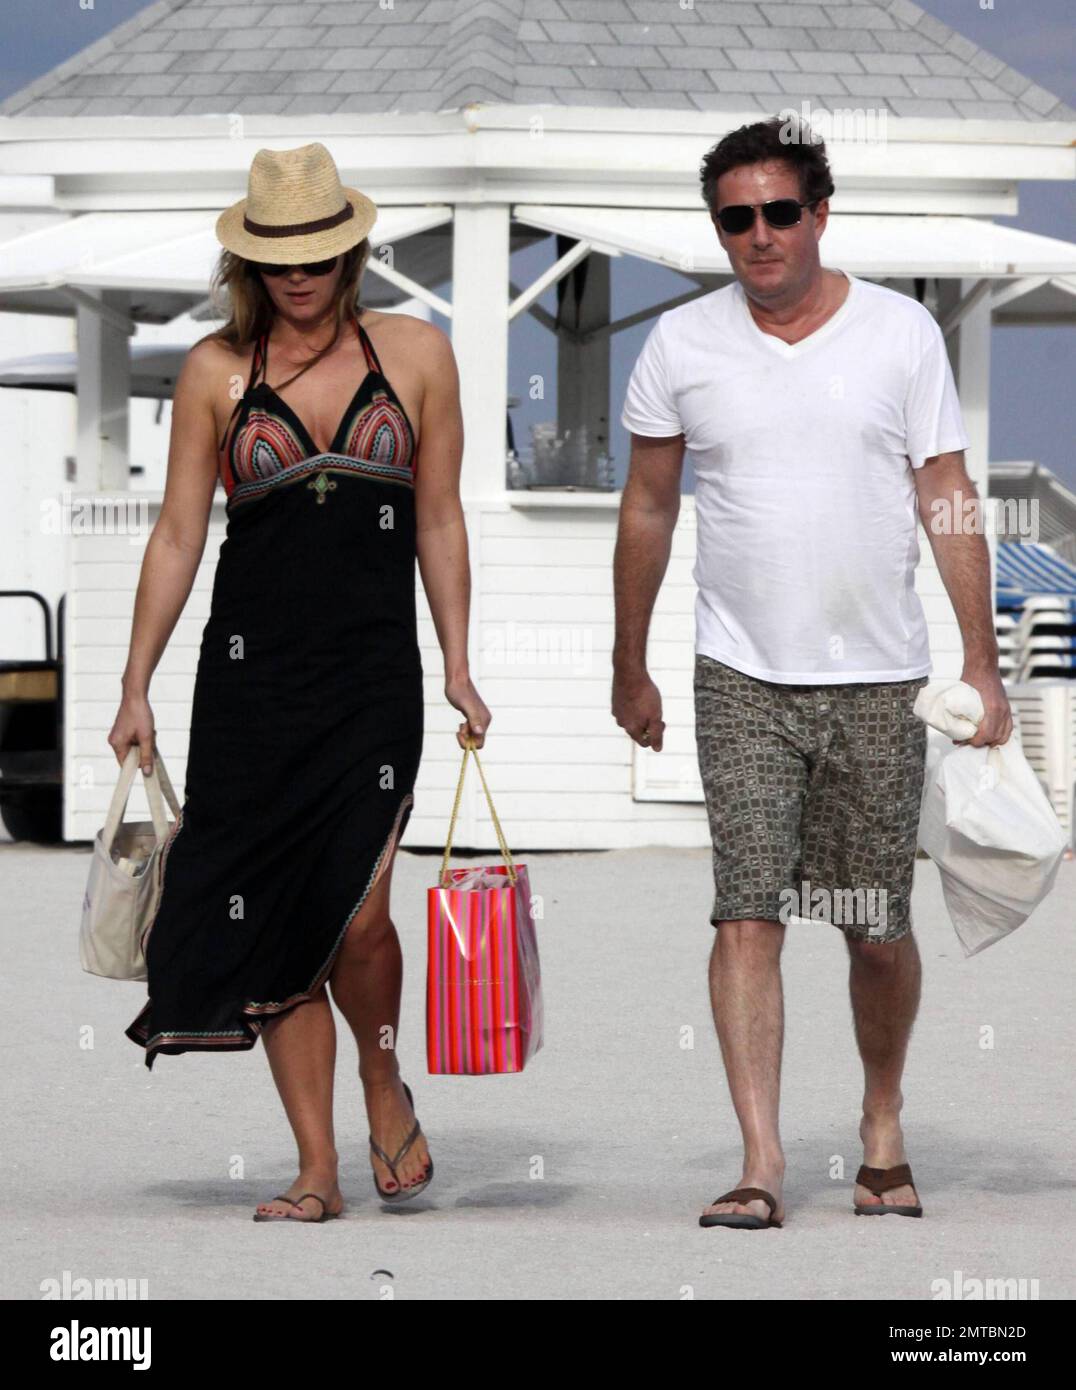 EXCLUSIVE!! "America's Got Talent" judge Piers Morgan and his writer girlfriend Celia Walden chill out together on Miami Beach.  Morgan enjoyed some down time and seemed engrossed in Michael VaughanÕs autobiography, Time to Declare whilst his stunning girlfriend sunbathed in a red bikini.  Miami, FL 1/14/2010 Stock Photo